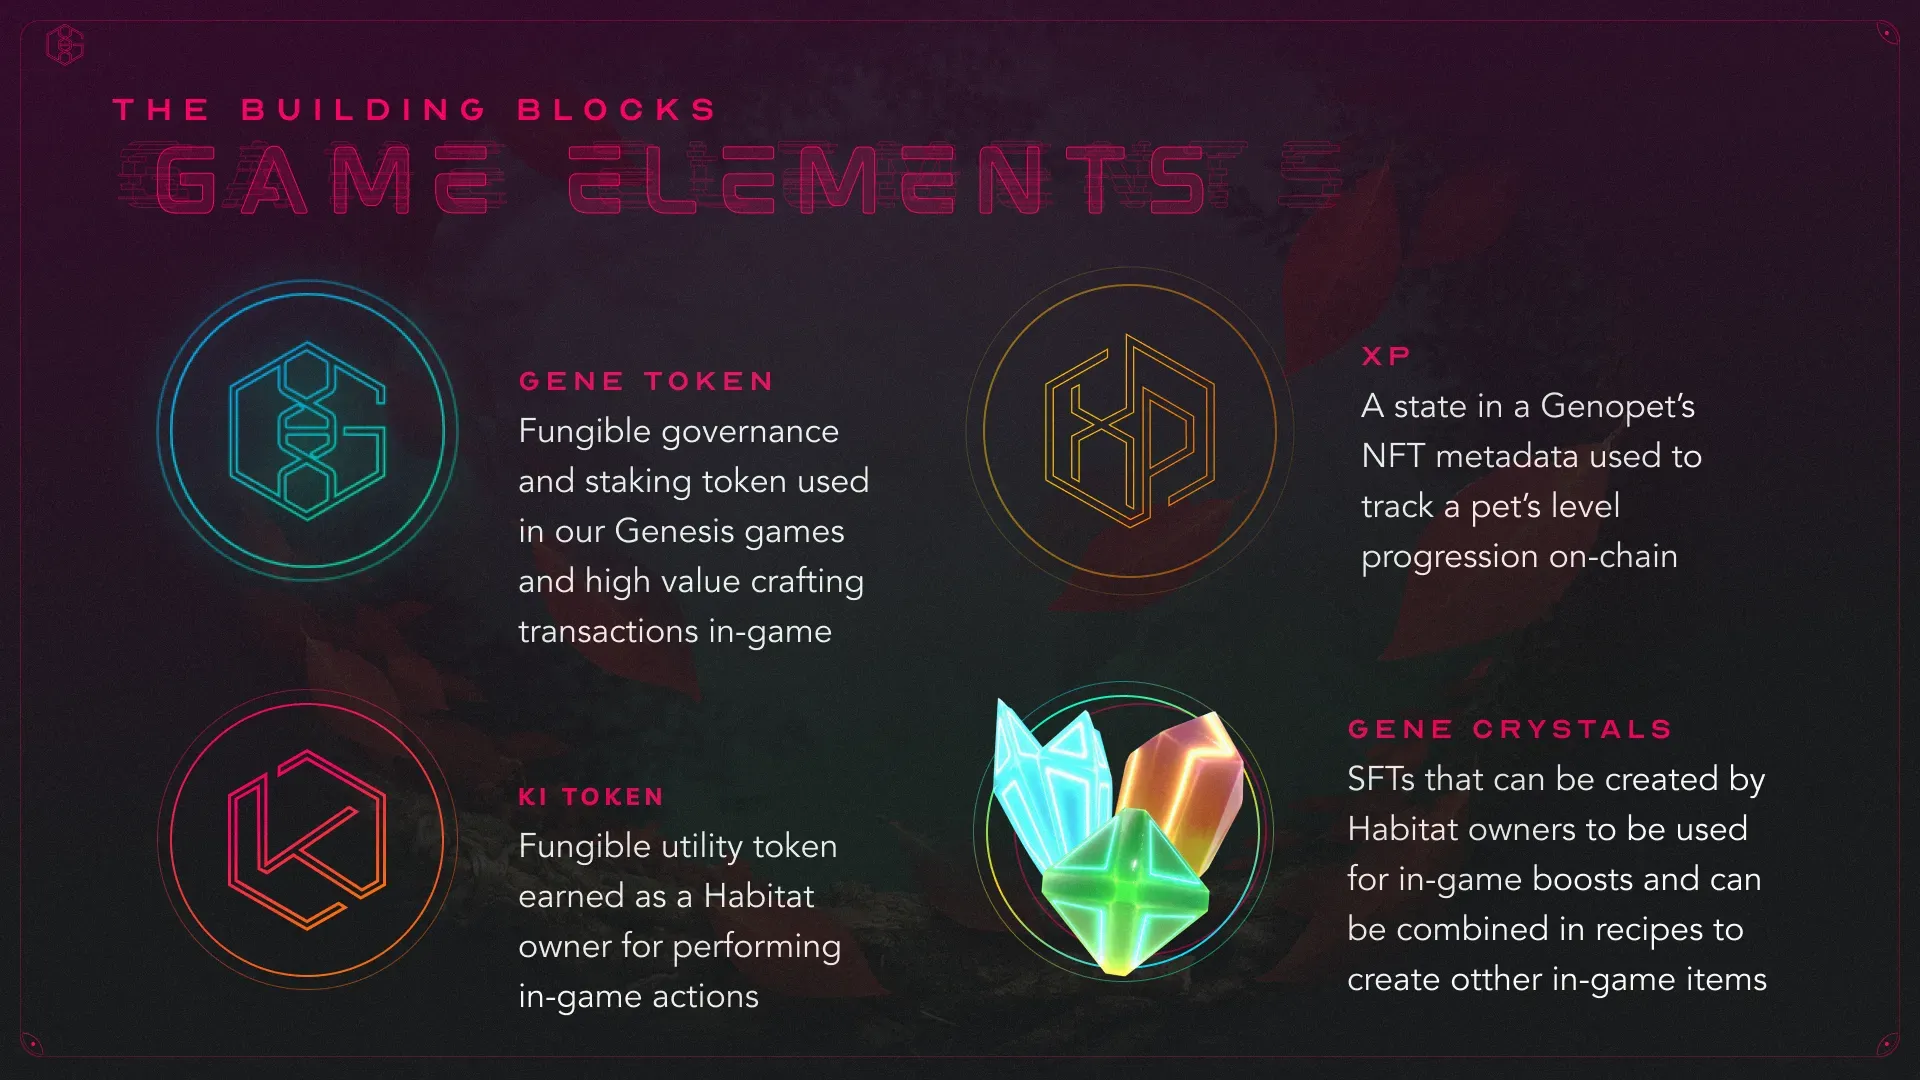 The Building Blocks or Game Elements of Genopets are shown and described on the poster. These include the GENE token, KI token, XP, and Gene Crystals. 